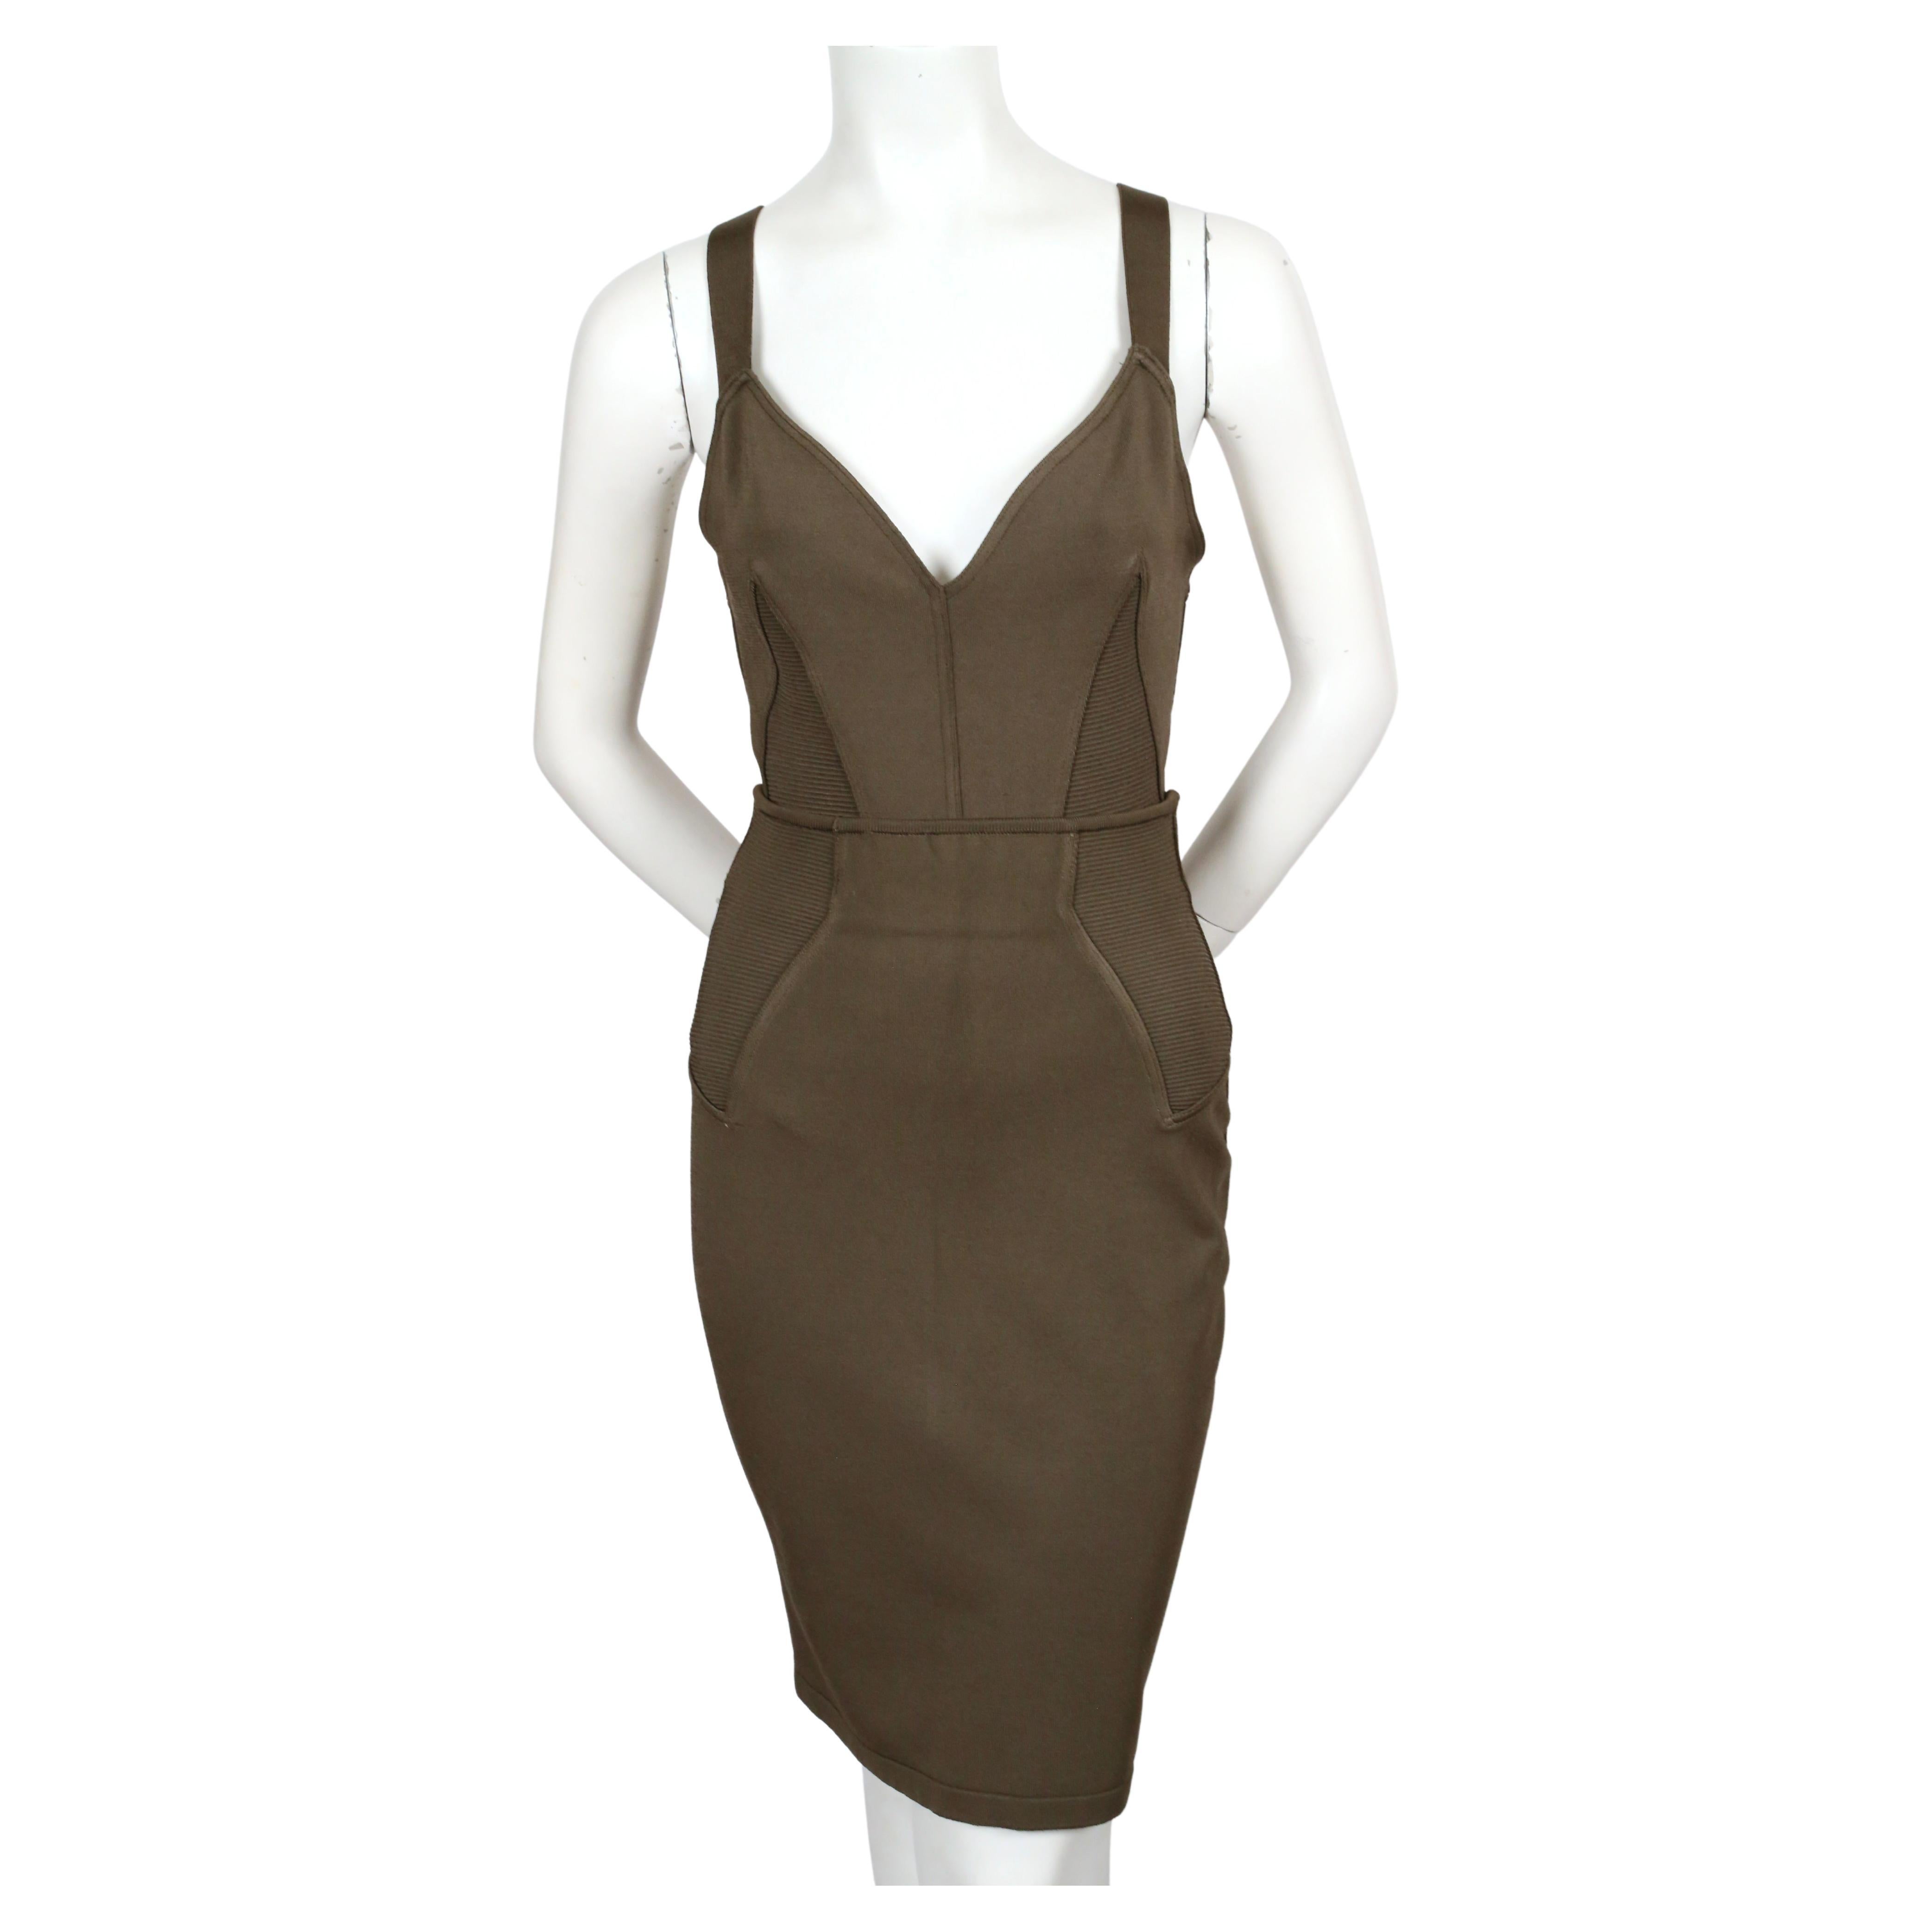 Khaki viscose bodysuit and matching skirt with cleverly placed ribbed inserts designed by Azzedine Alaia, dating to spring of 1990 as seen on the runway in white. No size indicated. Best fits a US 4-6. Approximate measurements of bodysuit